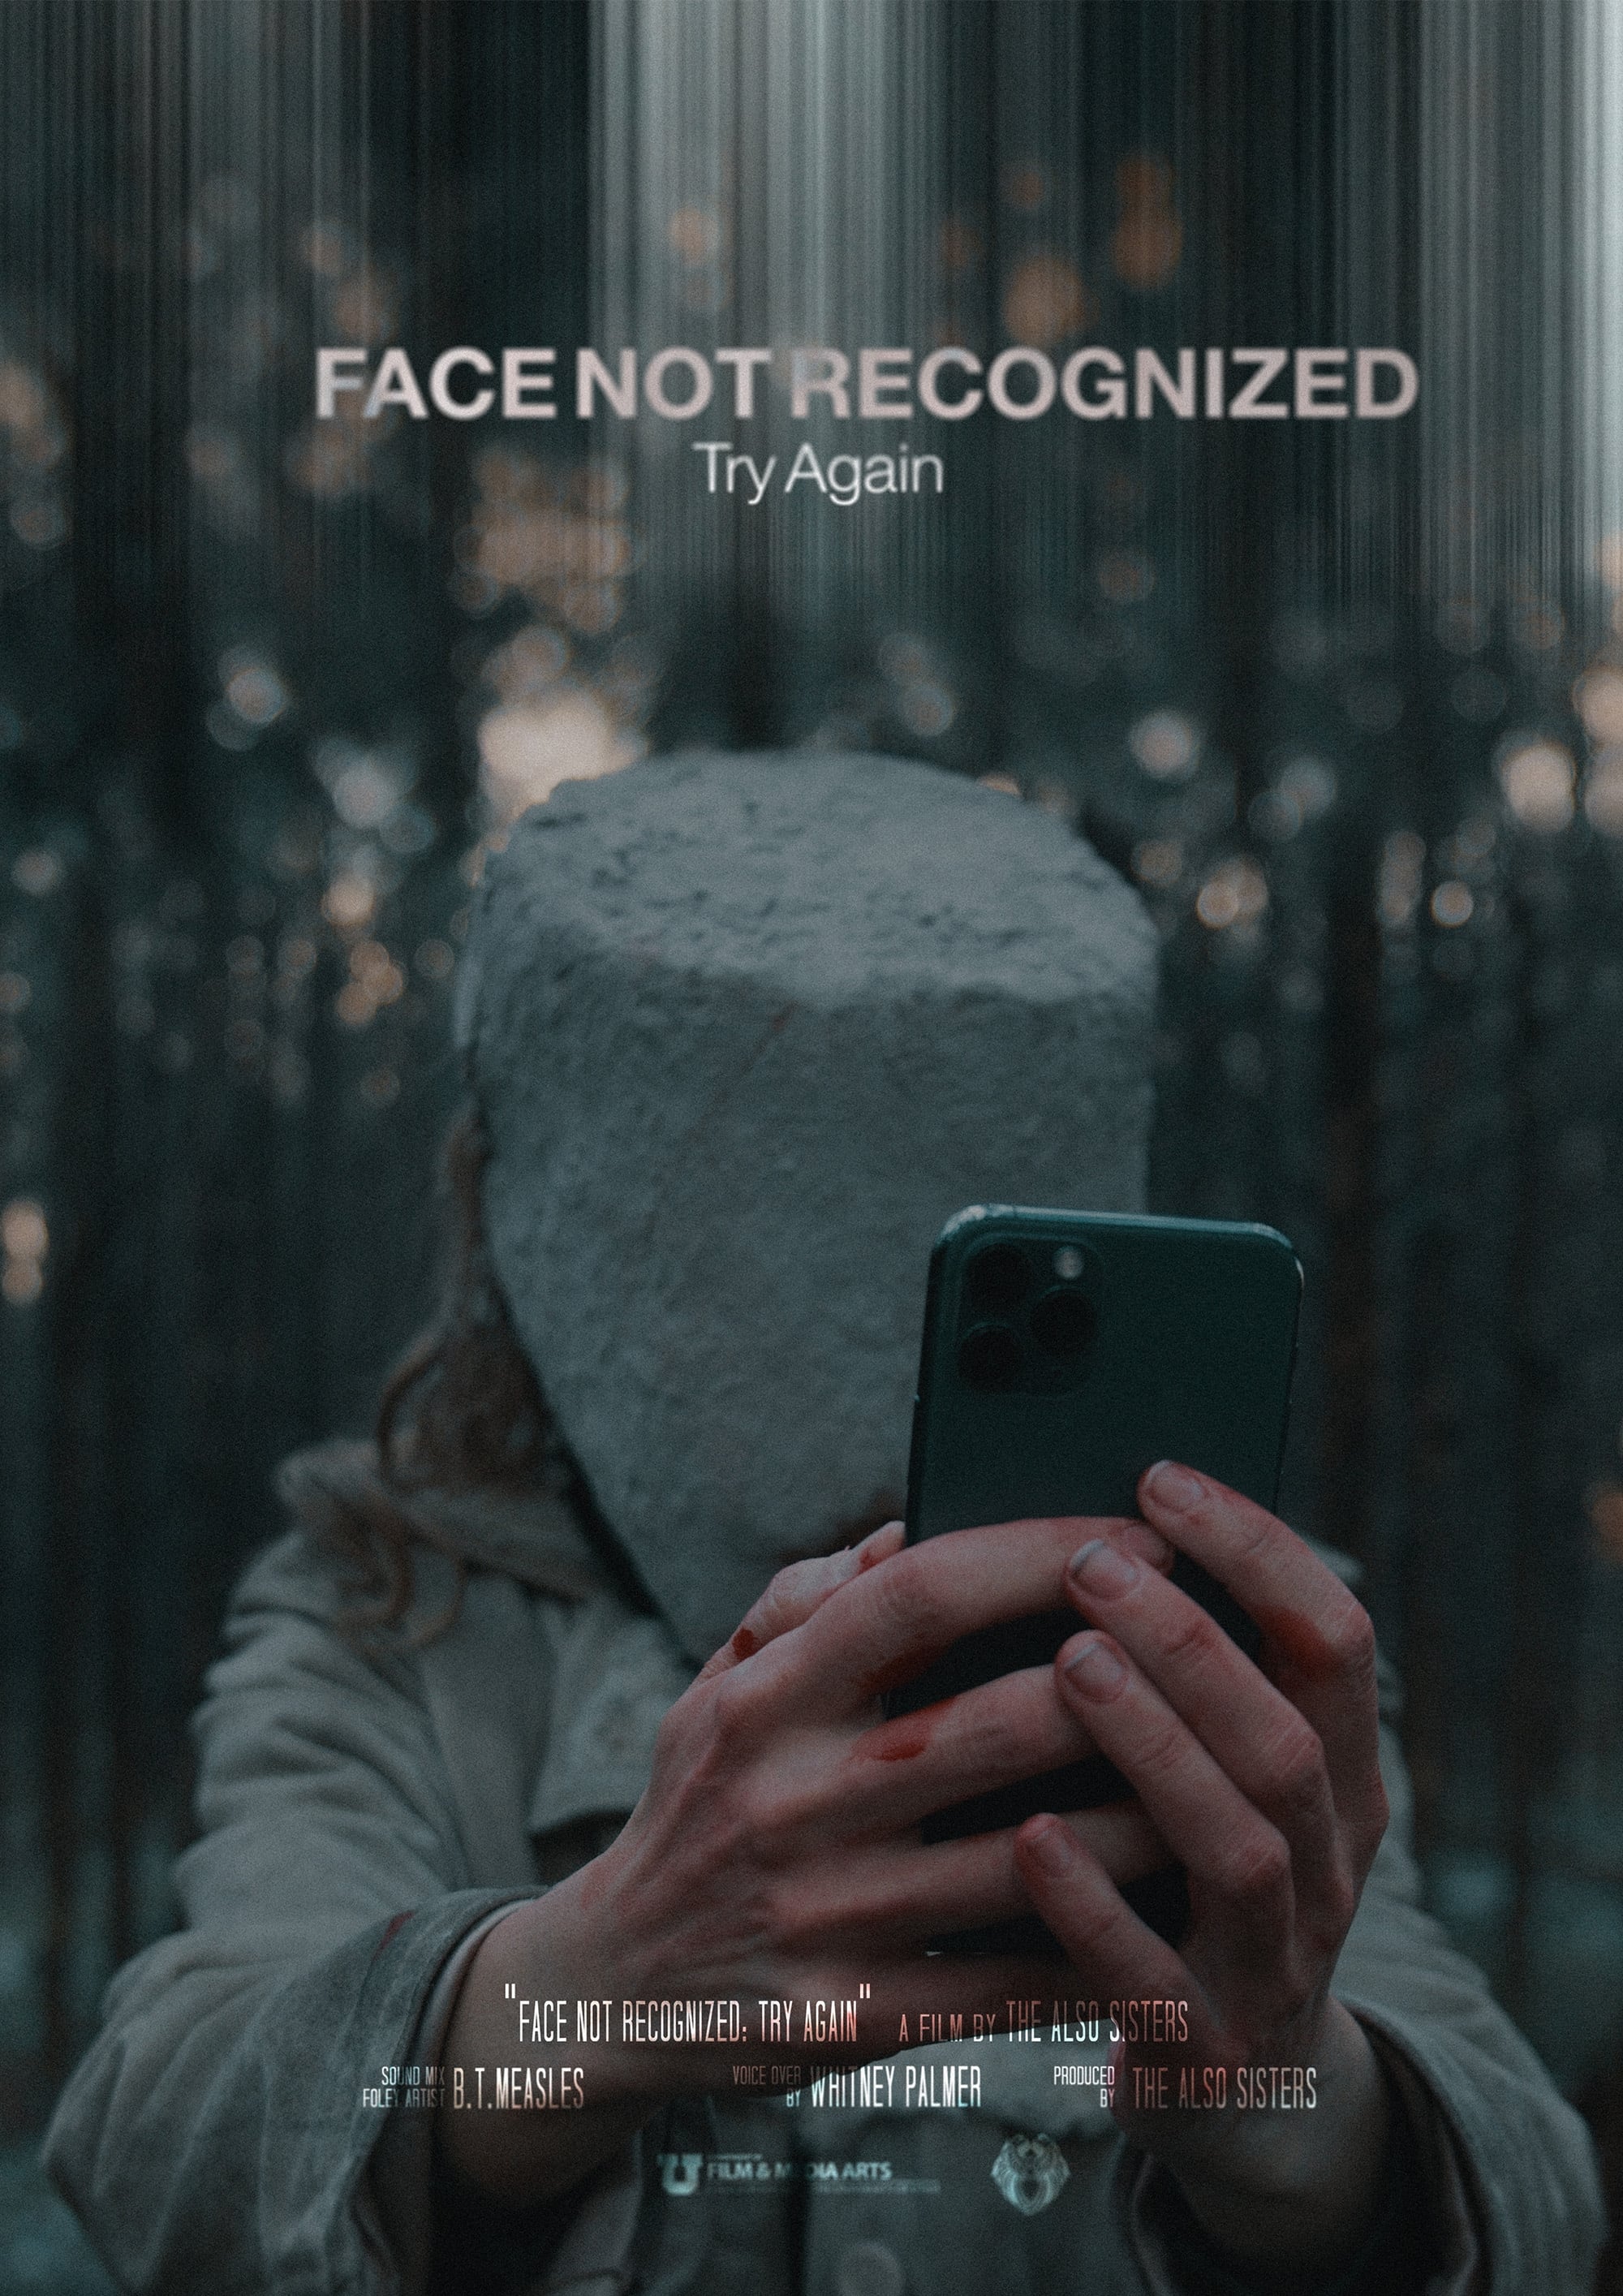 Face Not Recognized. Try Again.